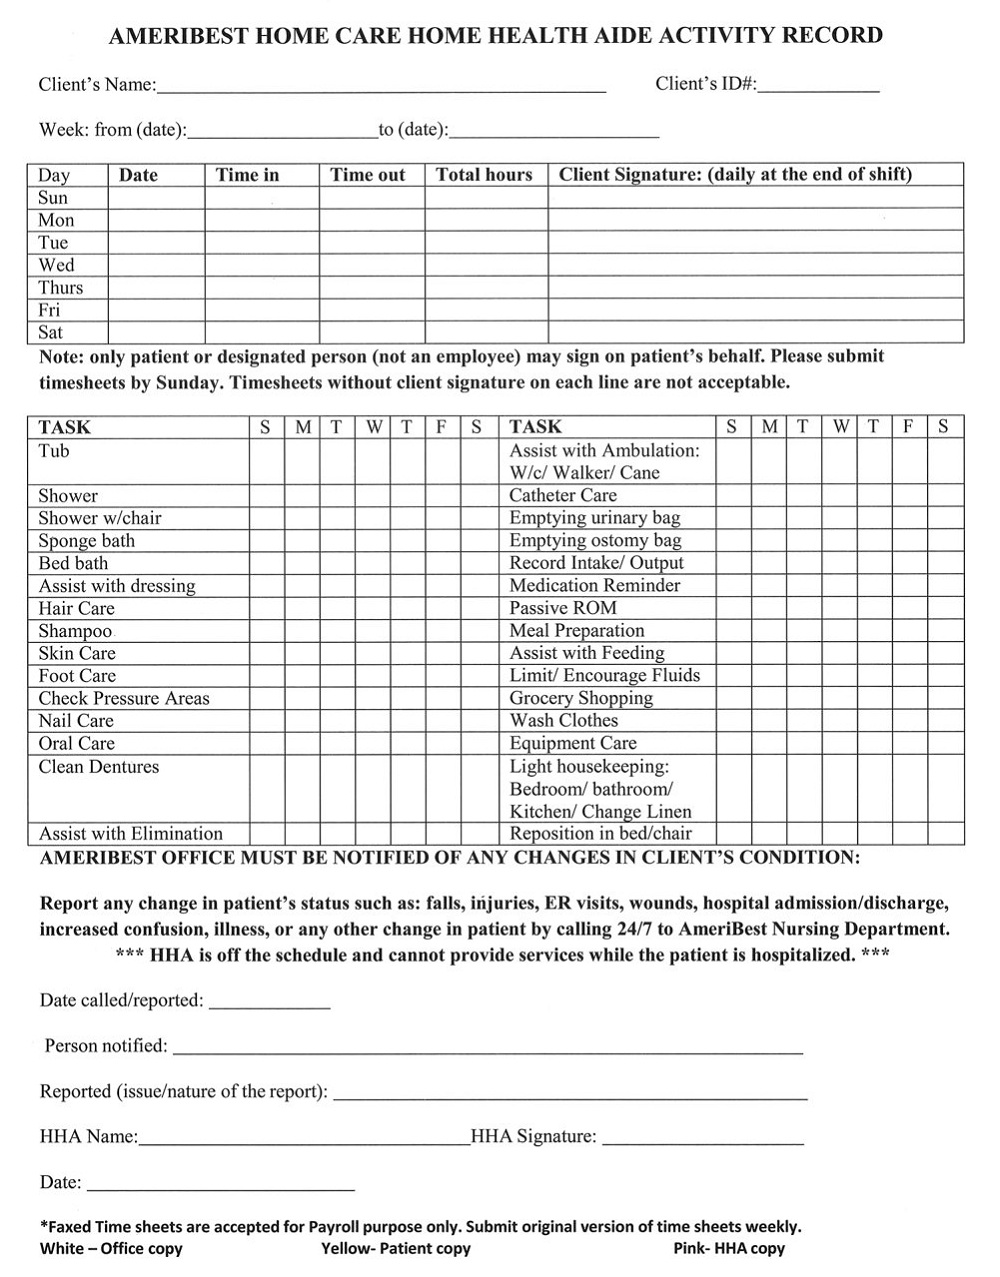 Home Health Aid Activity Record Form